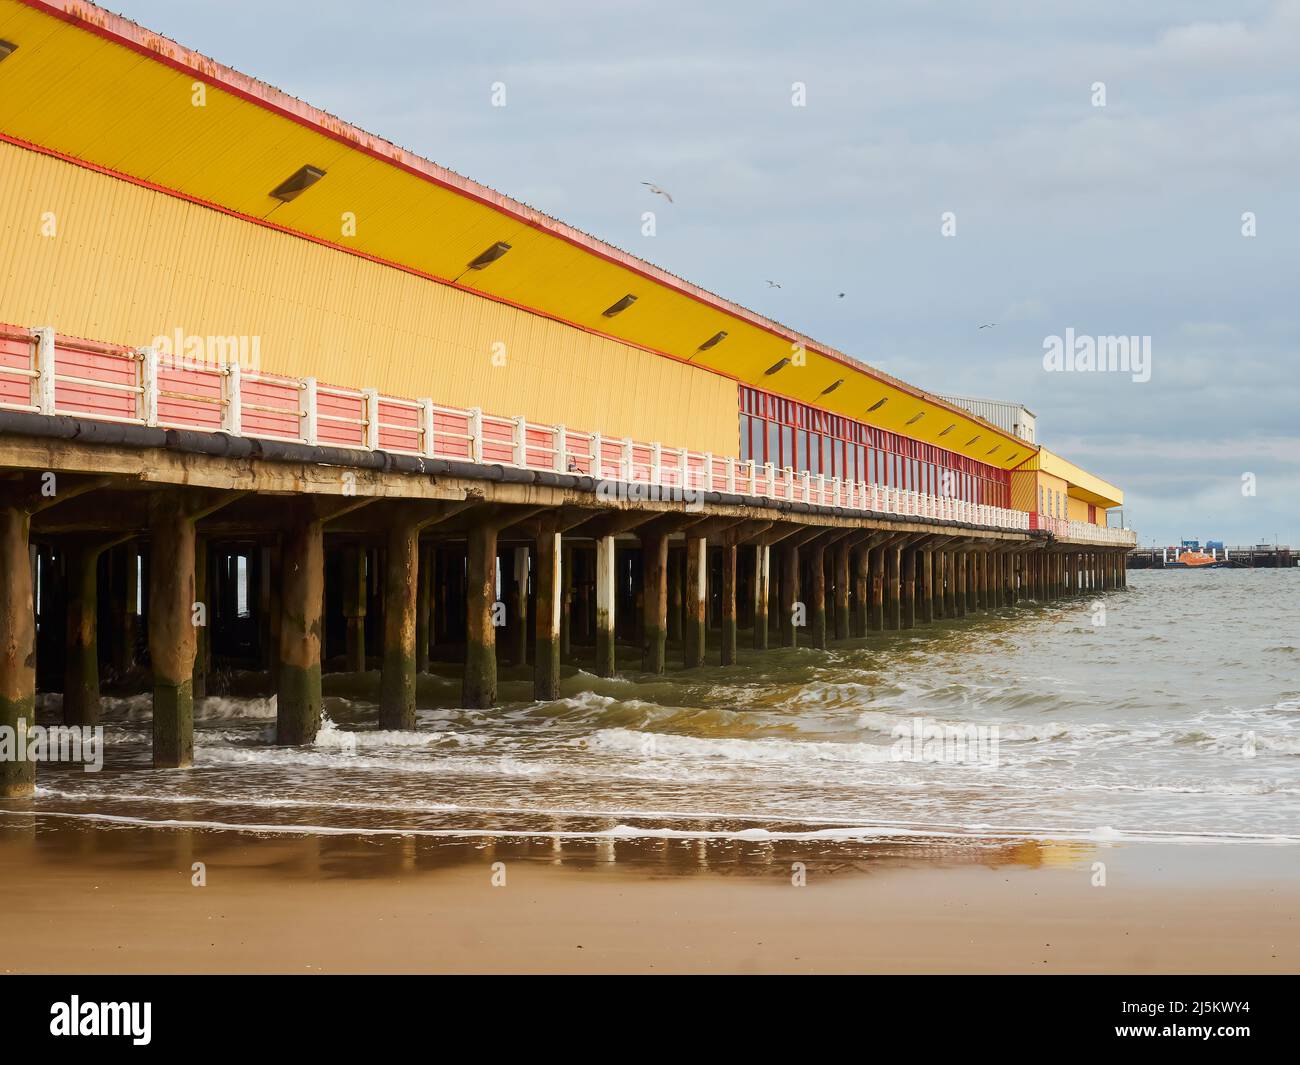 A fun fair complex on a pier, extending out into the sea at Frinton. The exposed, sea weed covered stanchions and cracking paint give a desolate feel. Stock Photo